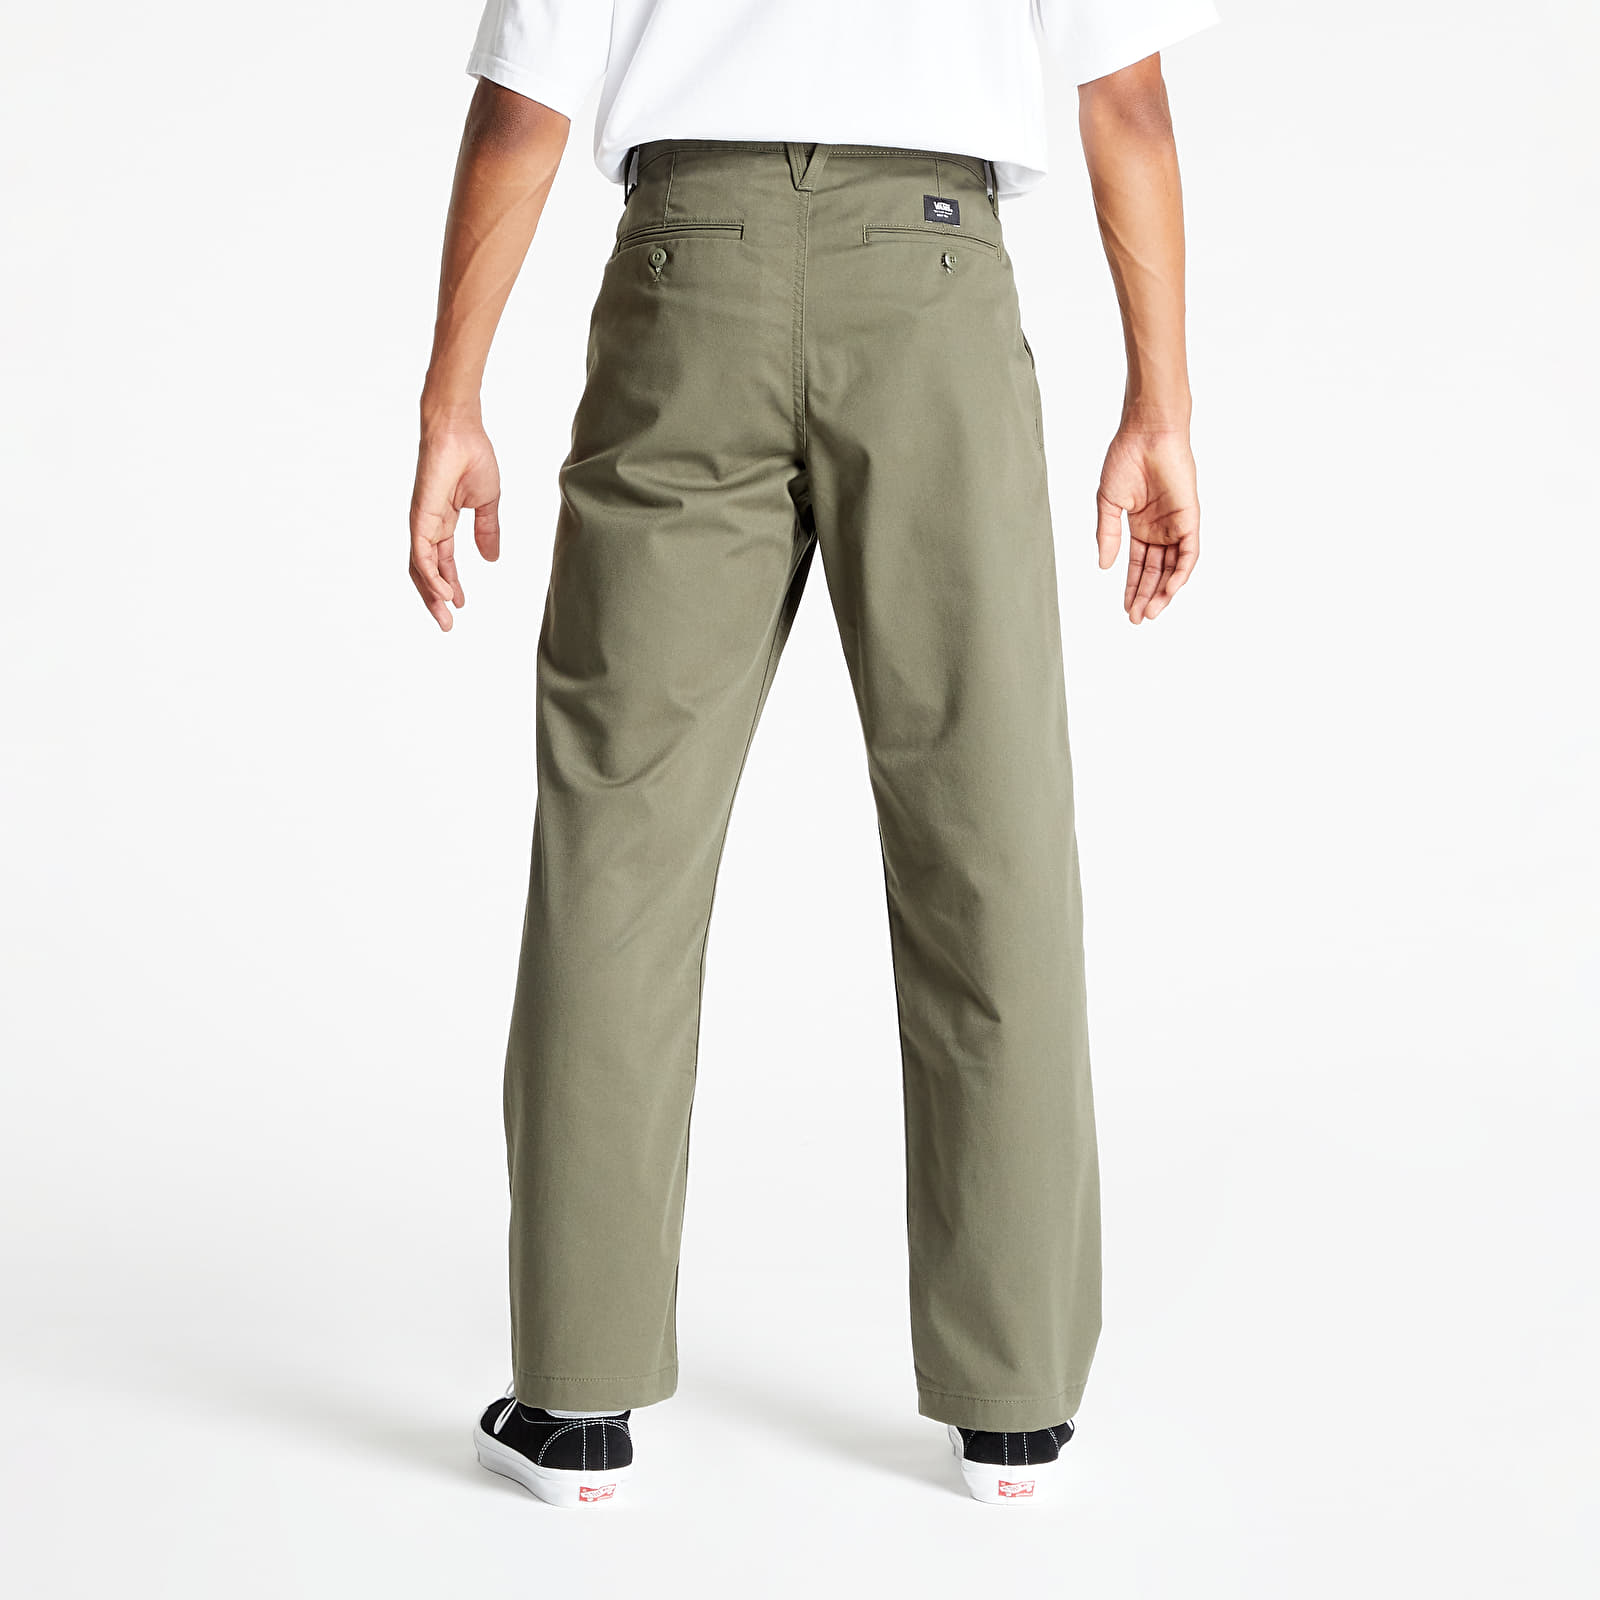 Džínsy a nohavice Vans Authentic Chino Loose Pant Grape Leaf